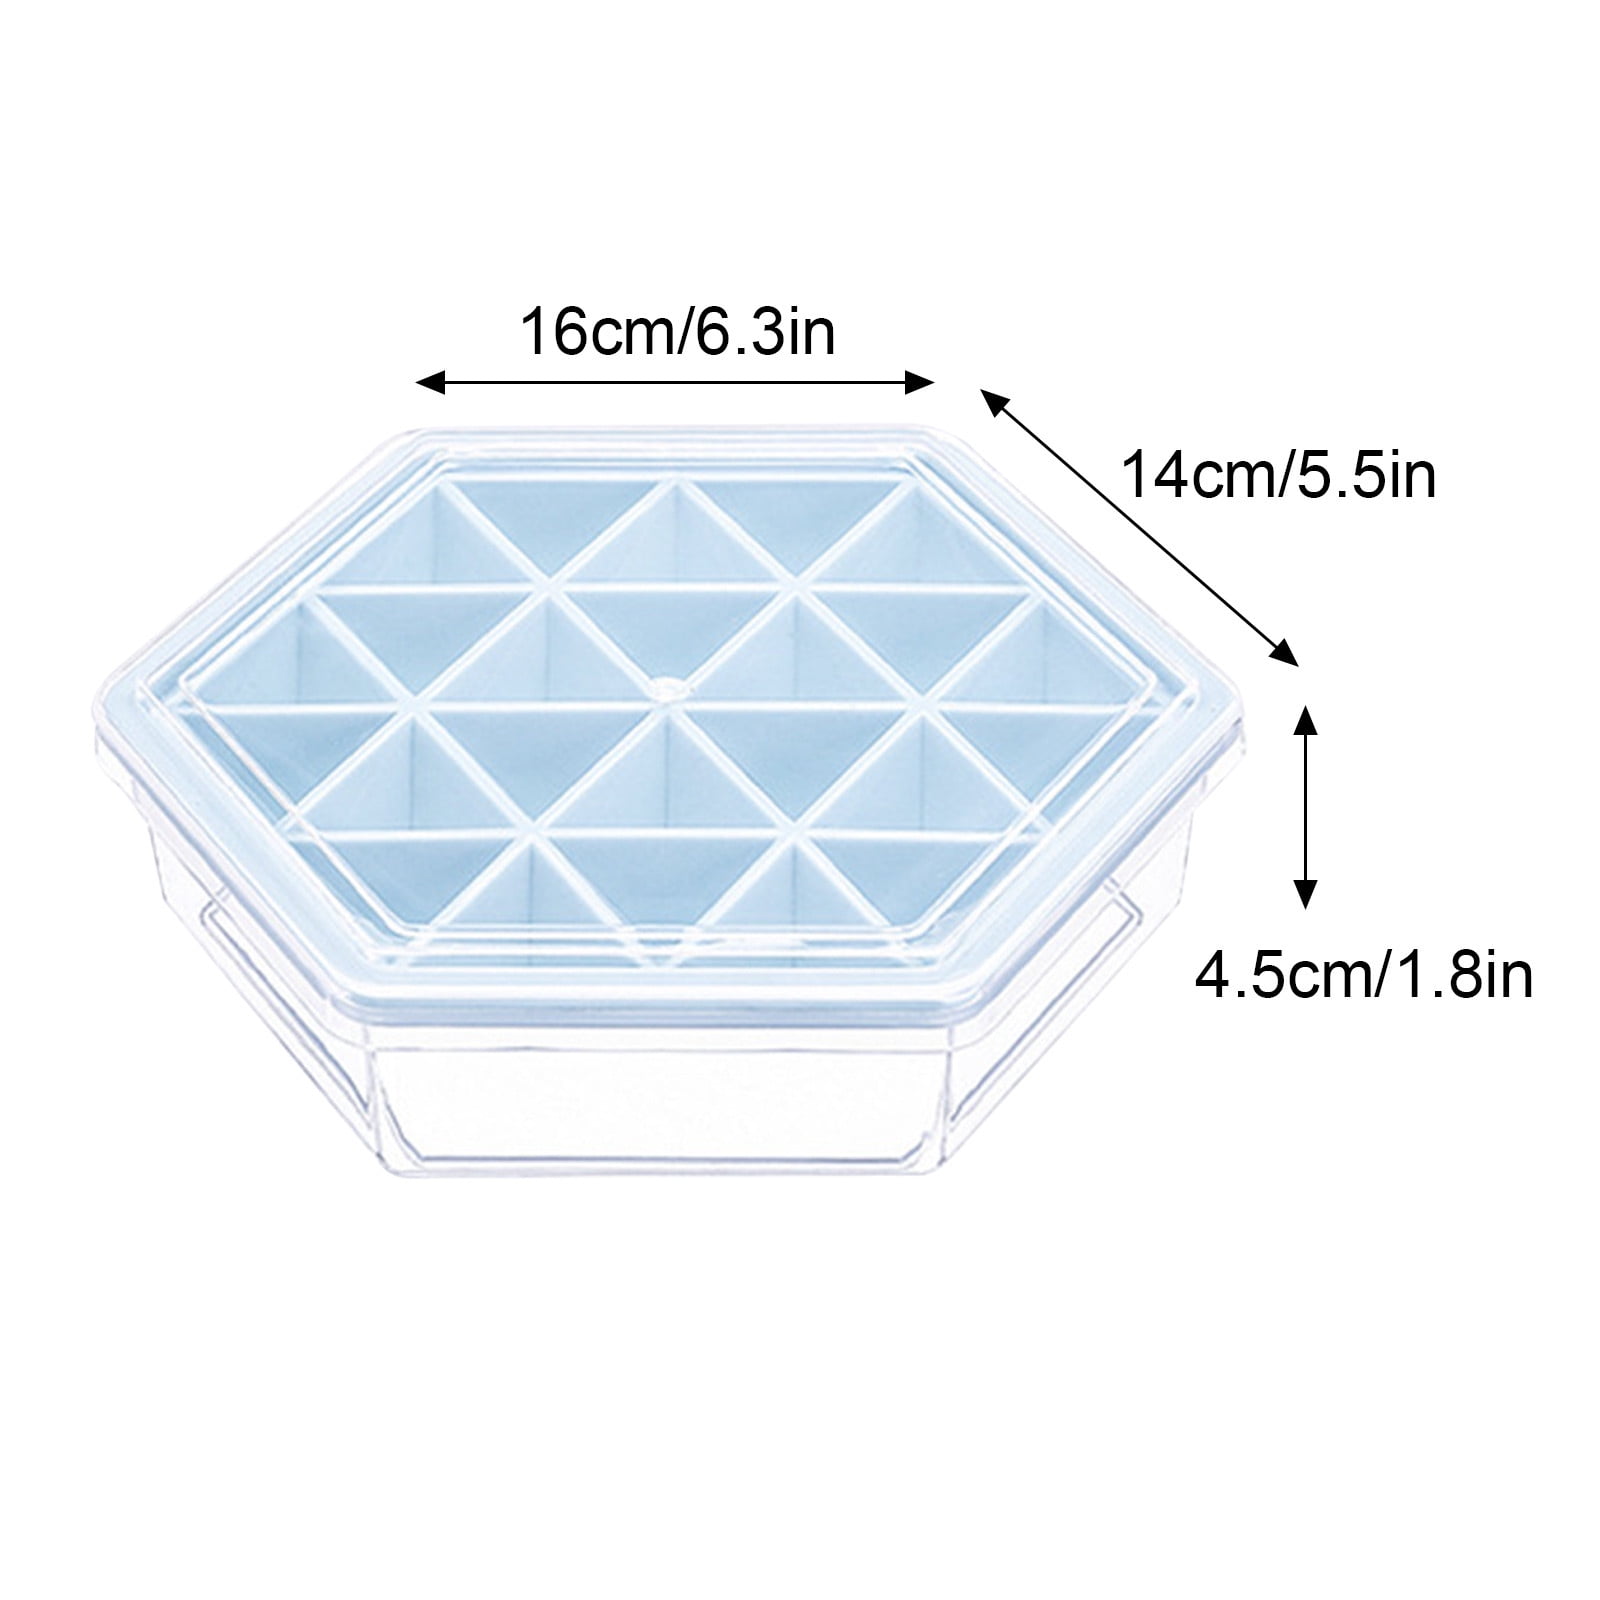 Funshowcase Pyramid Cone Cube Geometric Resin Silicone Molds Pack of 4  Trays, 100ml-Rubber-Measuring-Cup, 50-Wood-Stir-Sticks